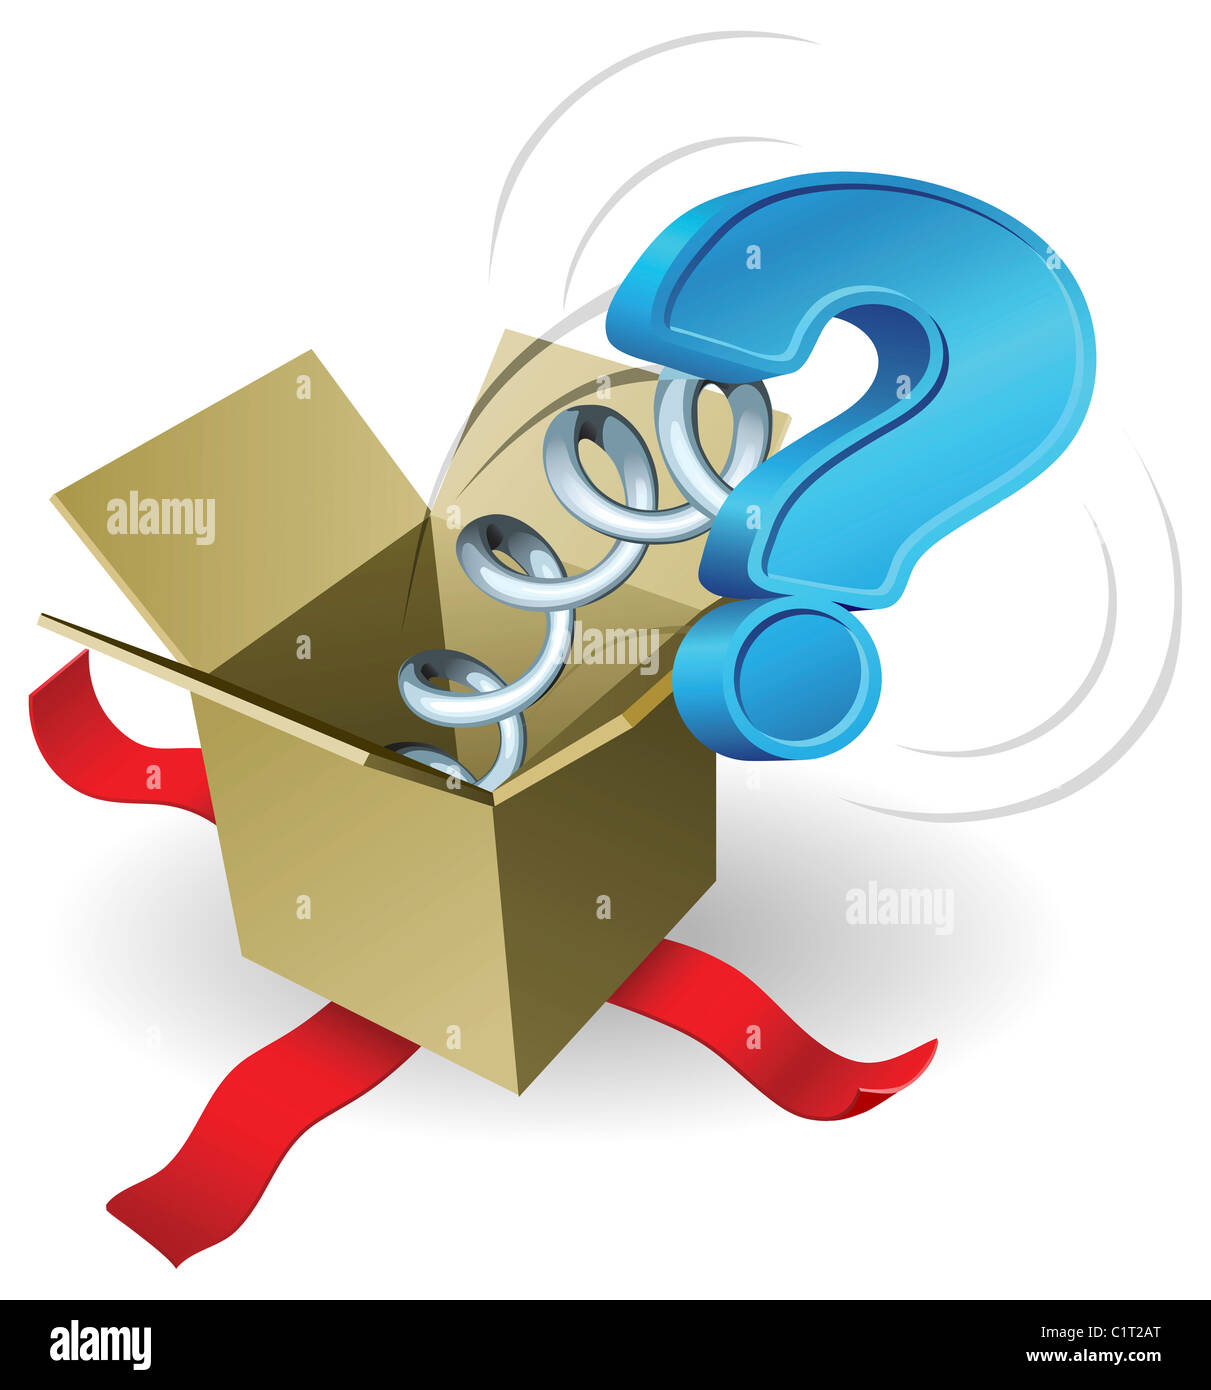 A question mark springing out of a box conceptual illustration. Stock Photo